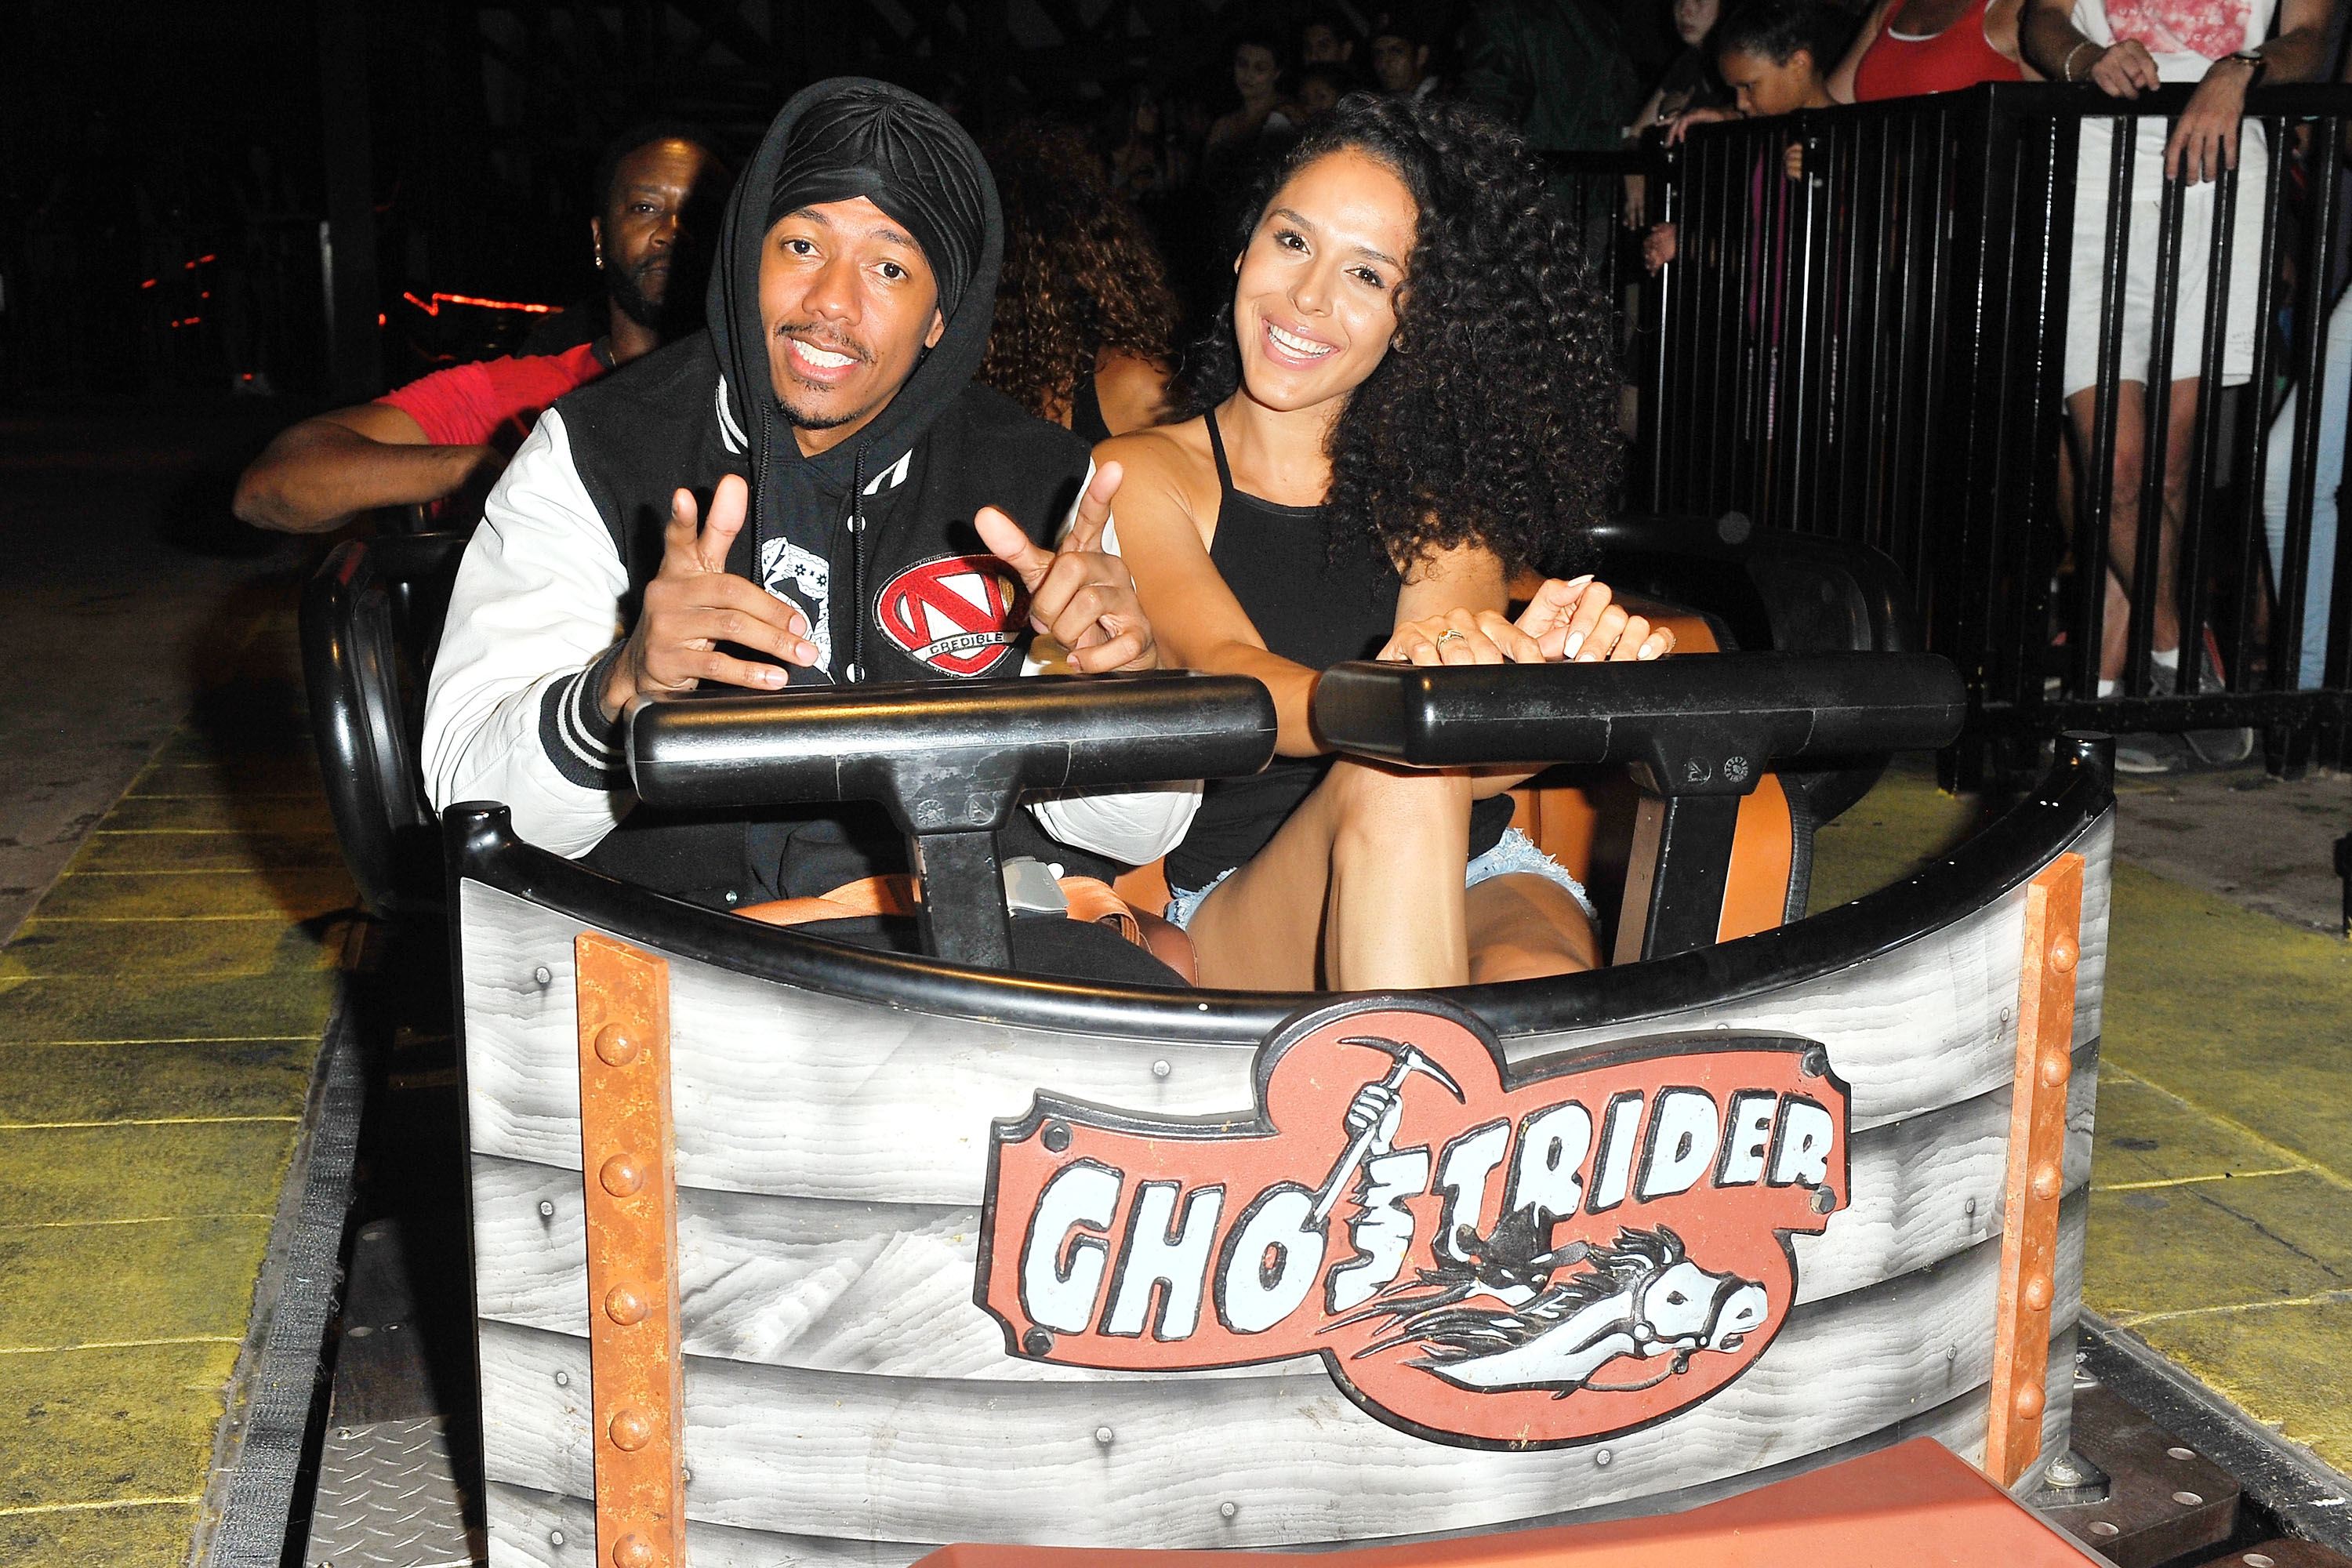 Nick Cannon and Brittany Bell ride the 'Ghostrider' Roller Coaster at Knott's Berry Farm on September 1, 2017